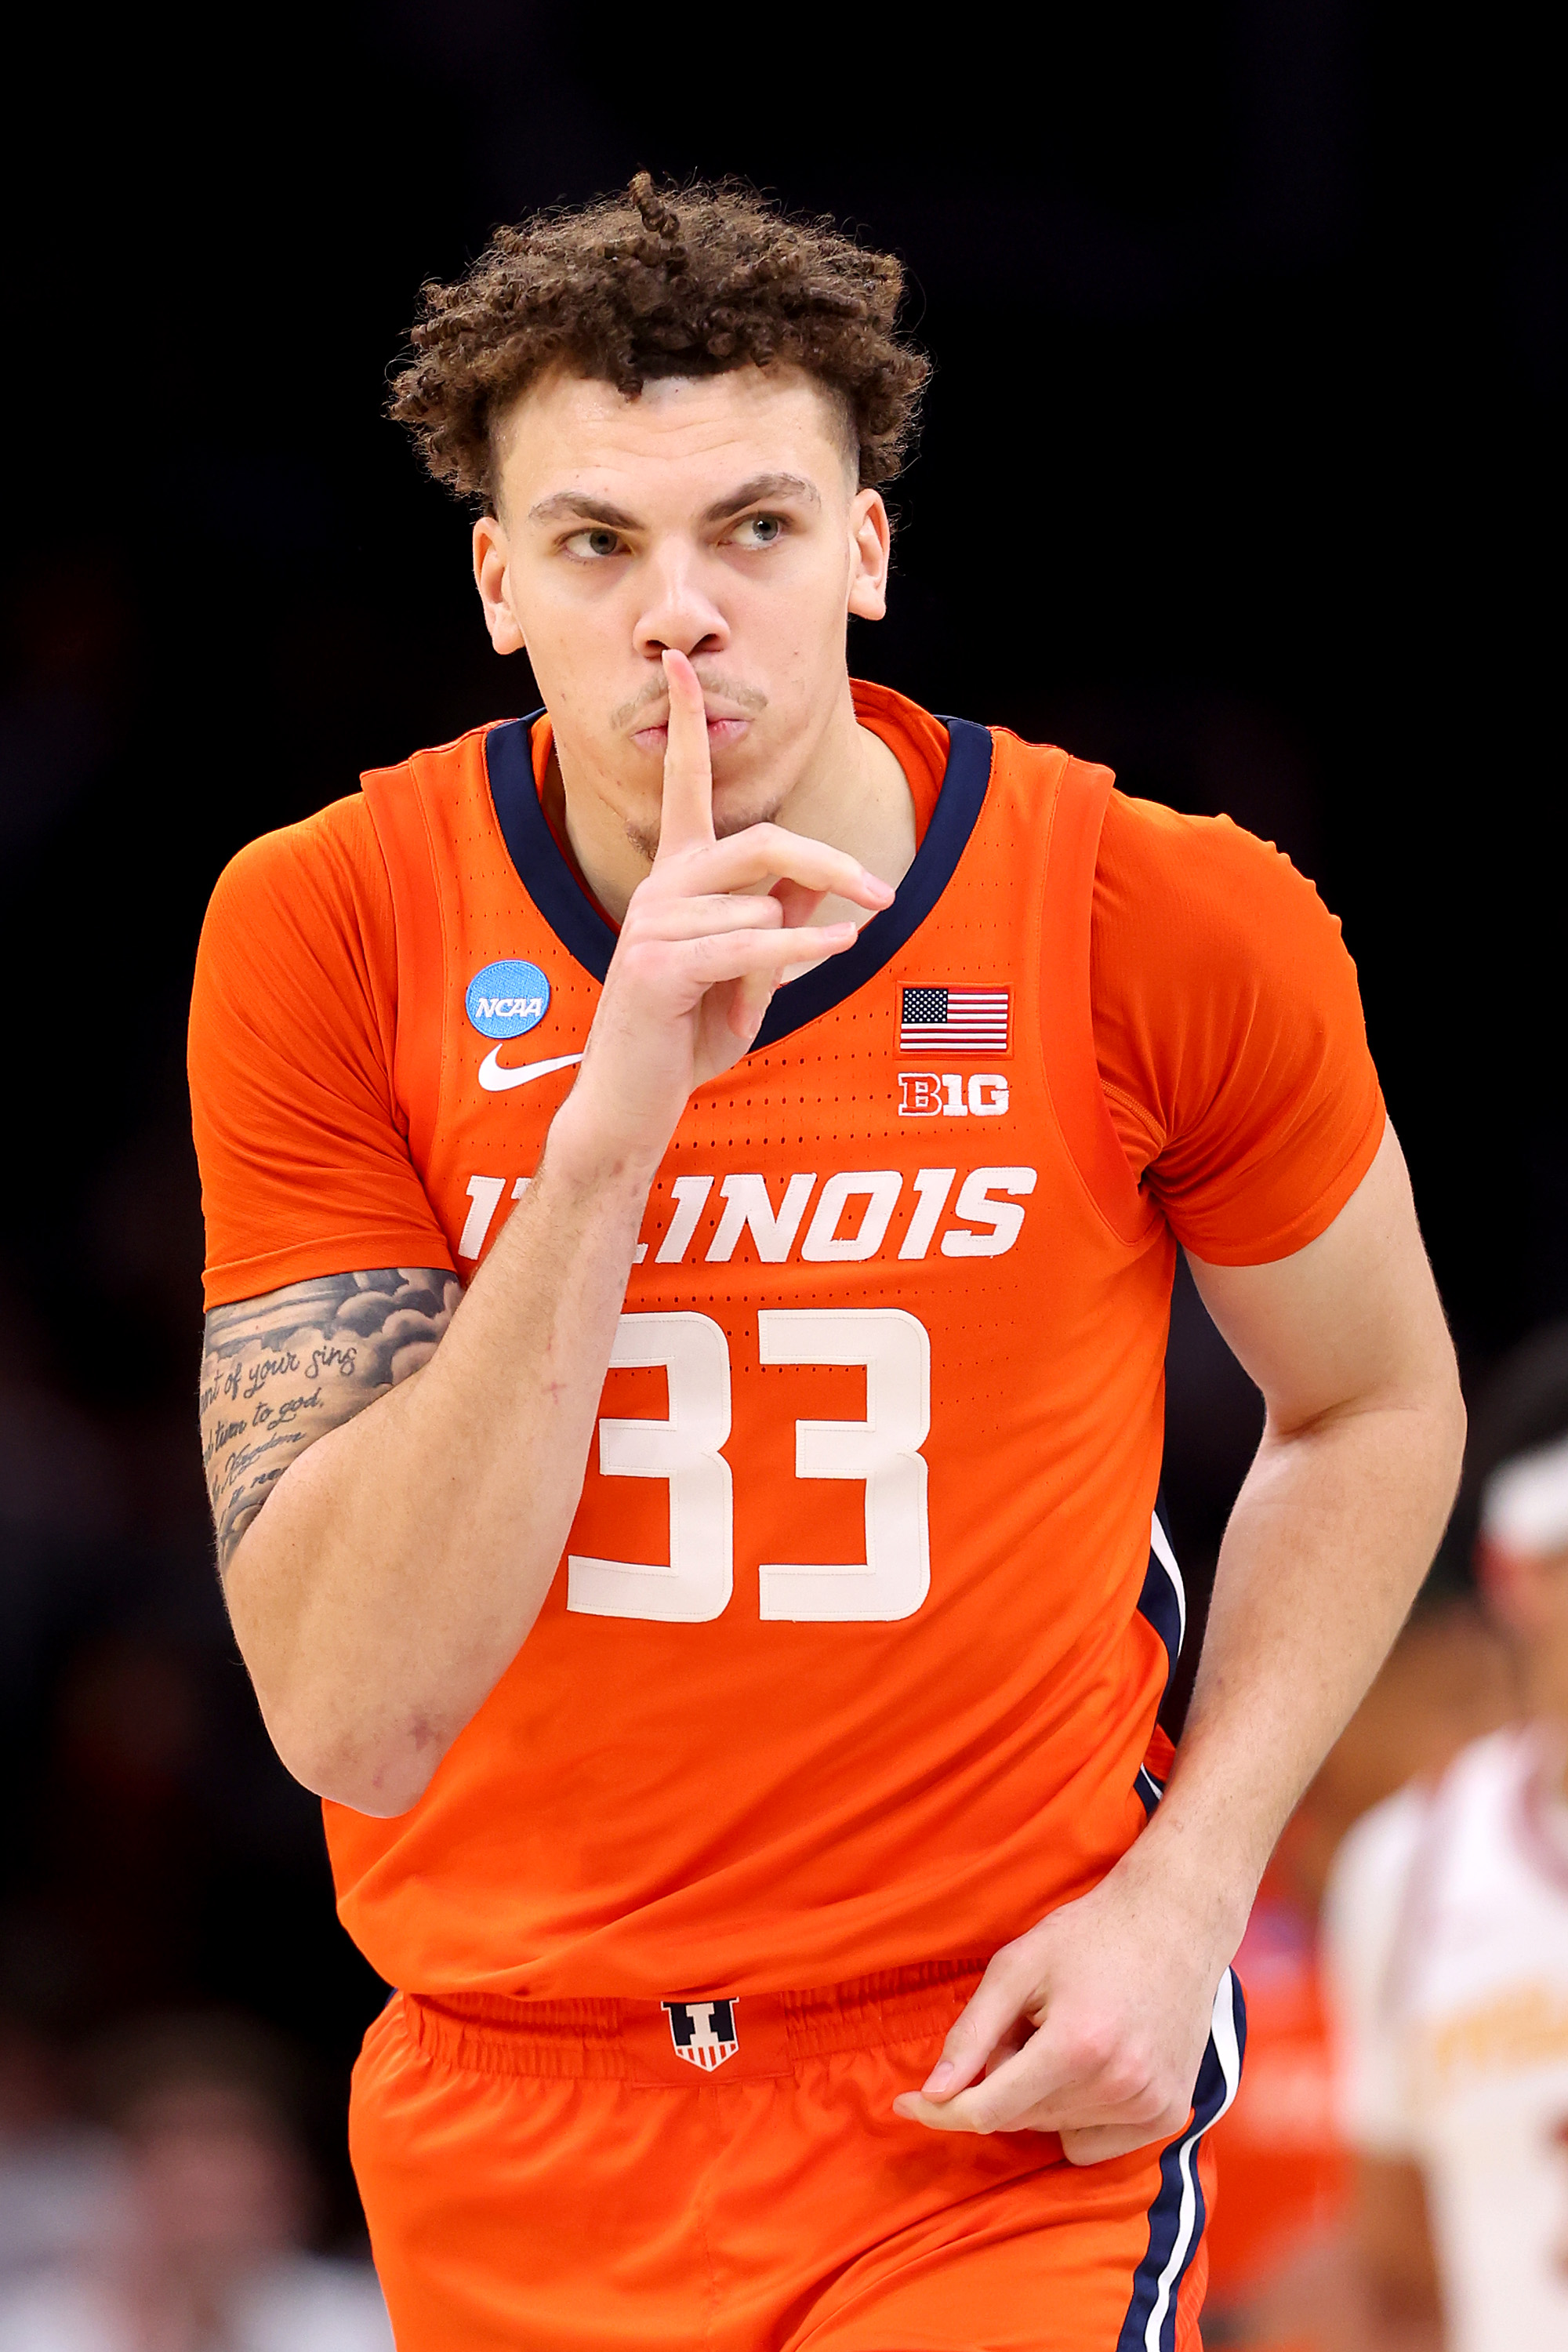 BOSTON, MASSACHUSETTS - MARCH 28: Coleman Hawkins #33 of the Illinois Fighting Illini celebrates a basket against the Iowa State Cyclones during the second half in the Sweet 16 round of the NCAA Men's Basketball Tournament at TD Garden on March 28, 2024 in Boston, Massachusetts. (Photo by Michael Reaves/Getty Images)